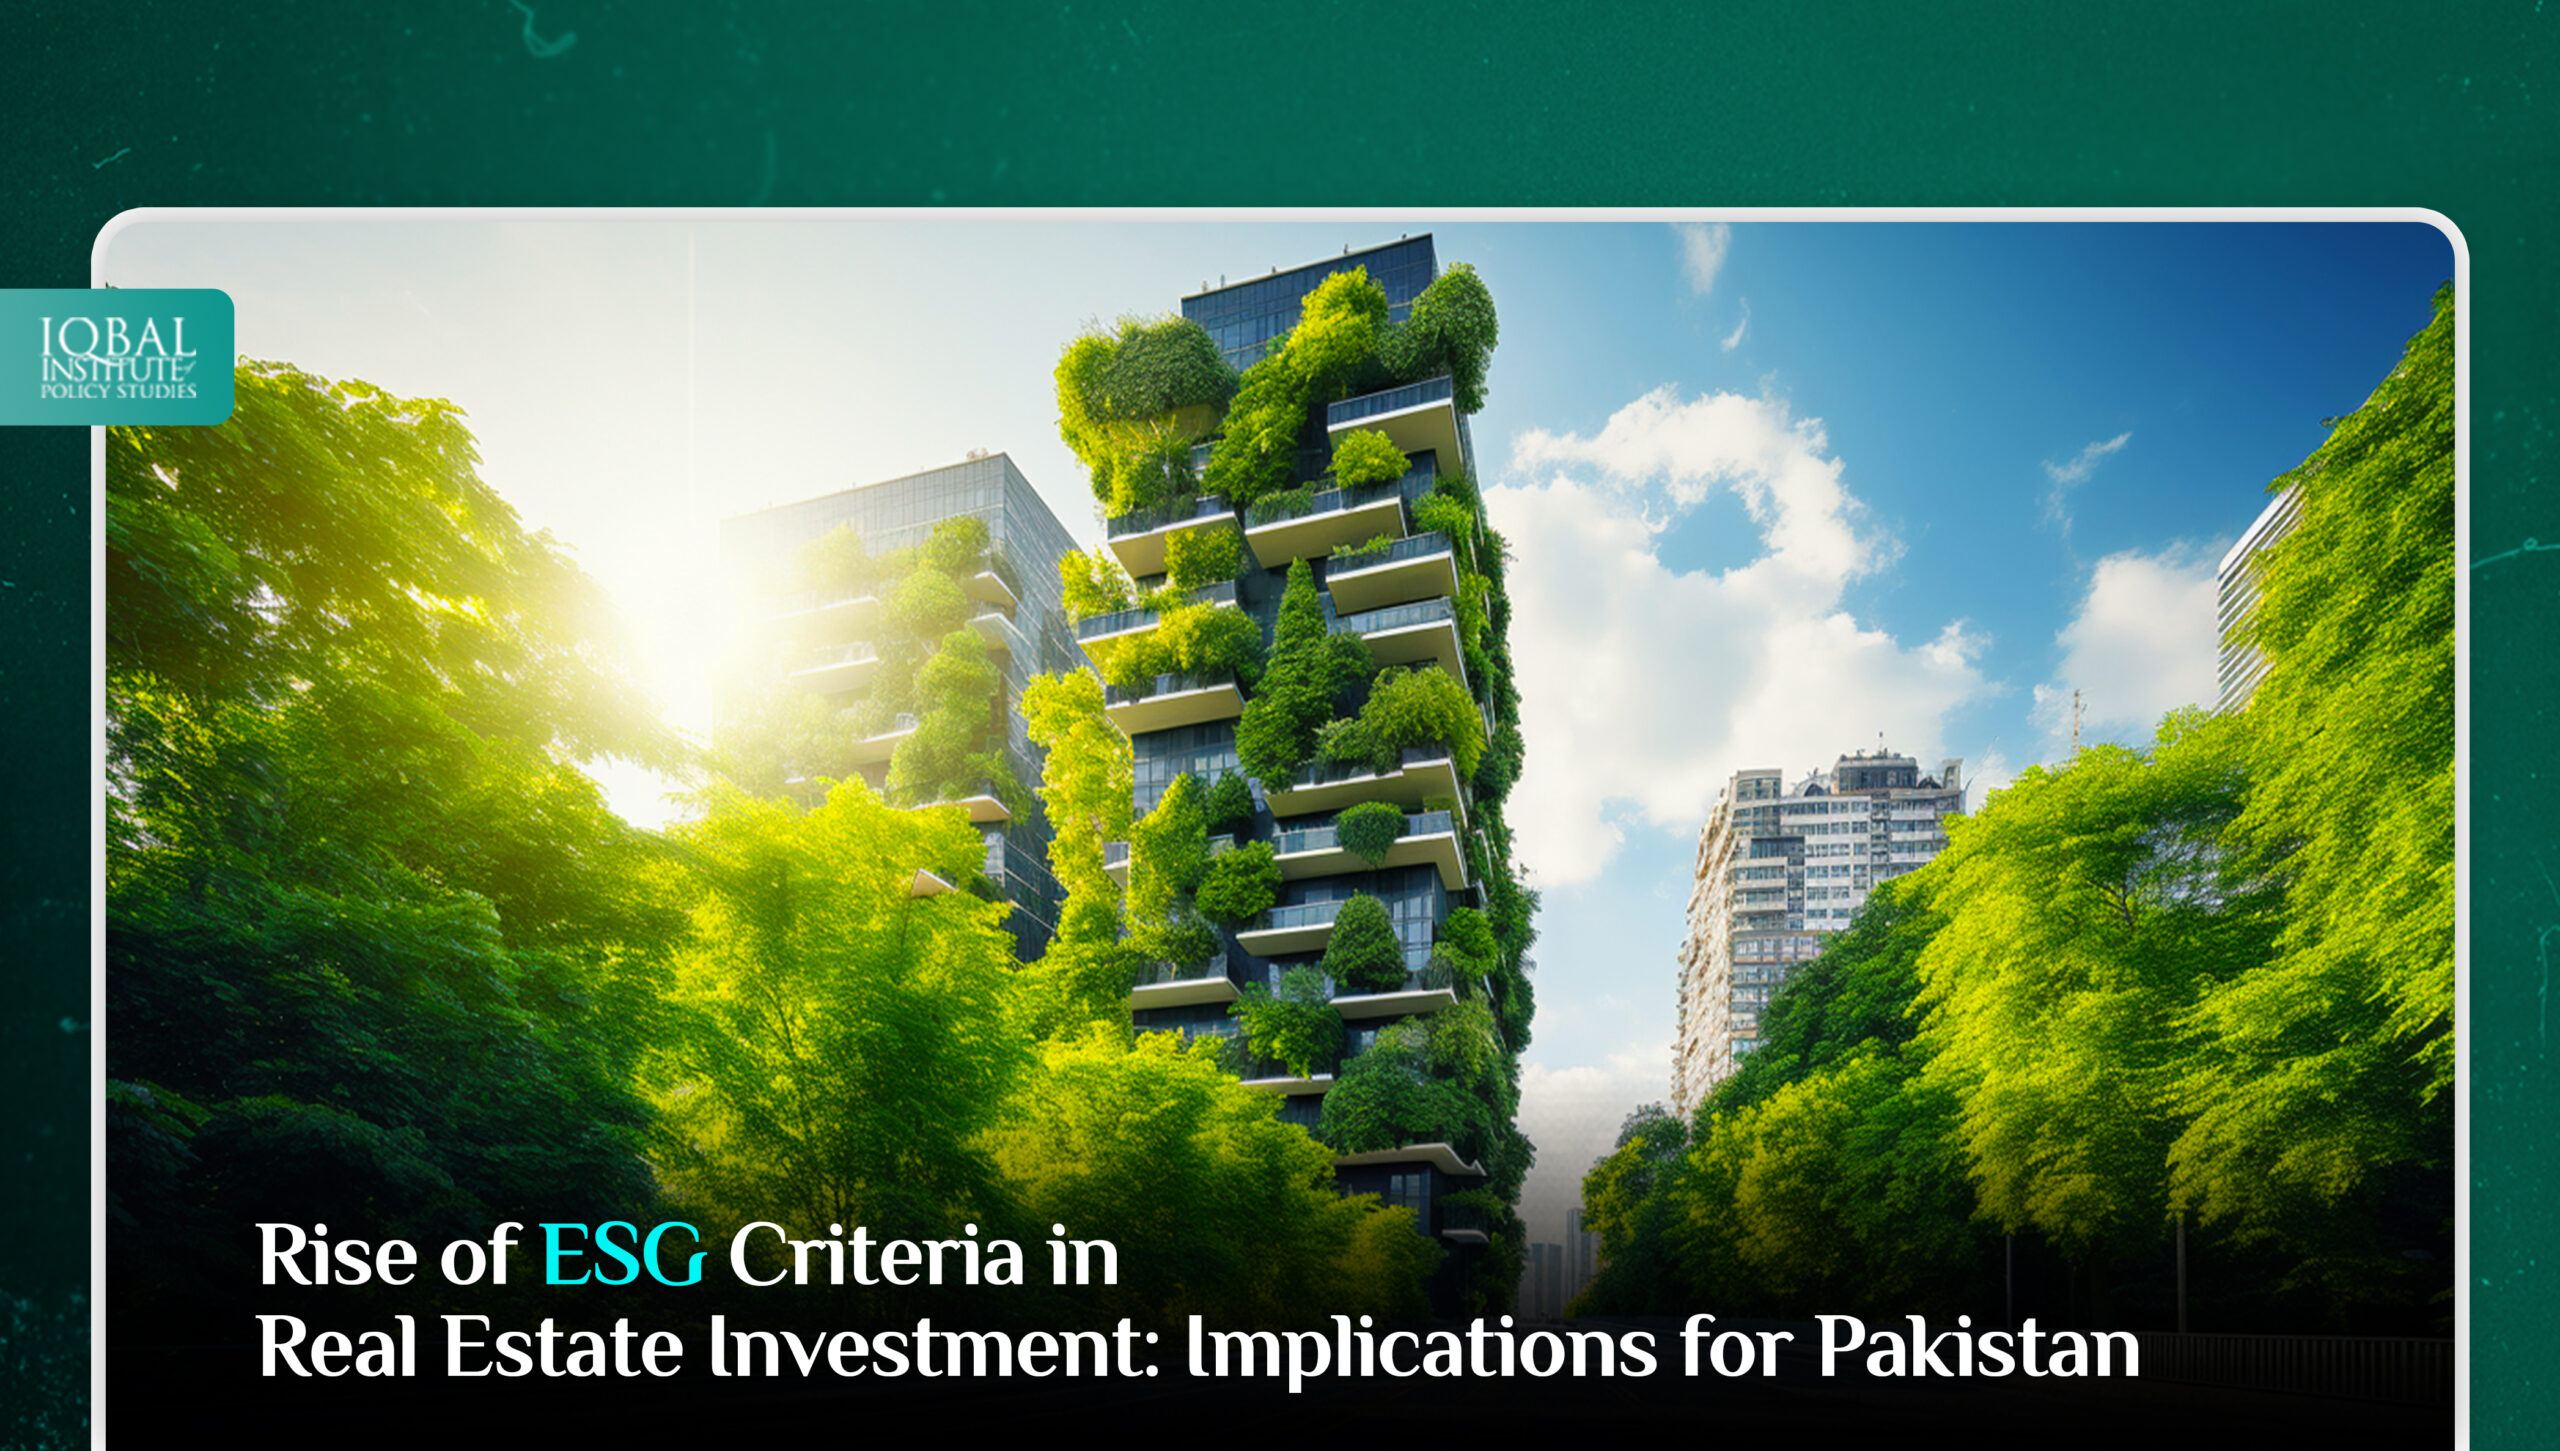 Rise of ESG Criteria in Real Estate Investment: Implications for Pakistan